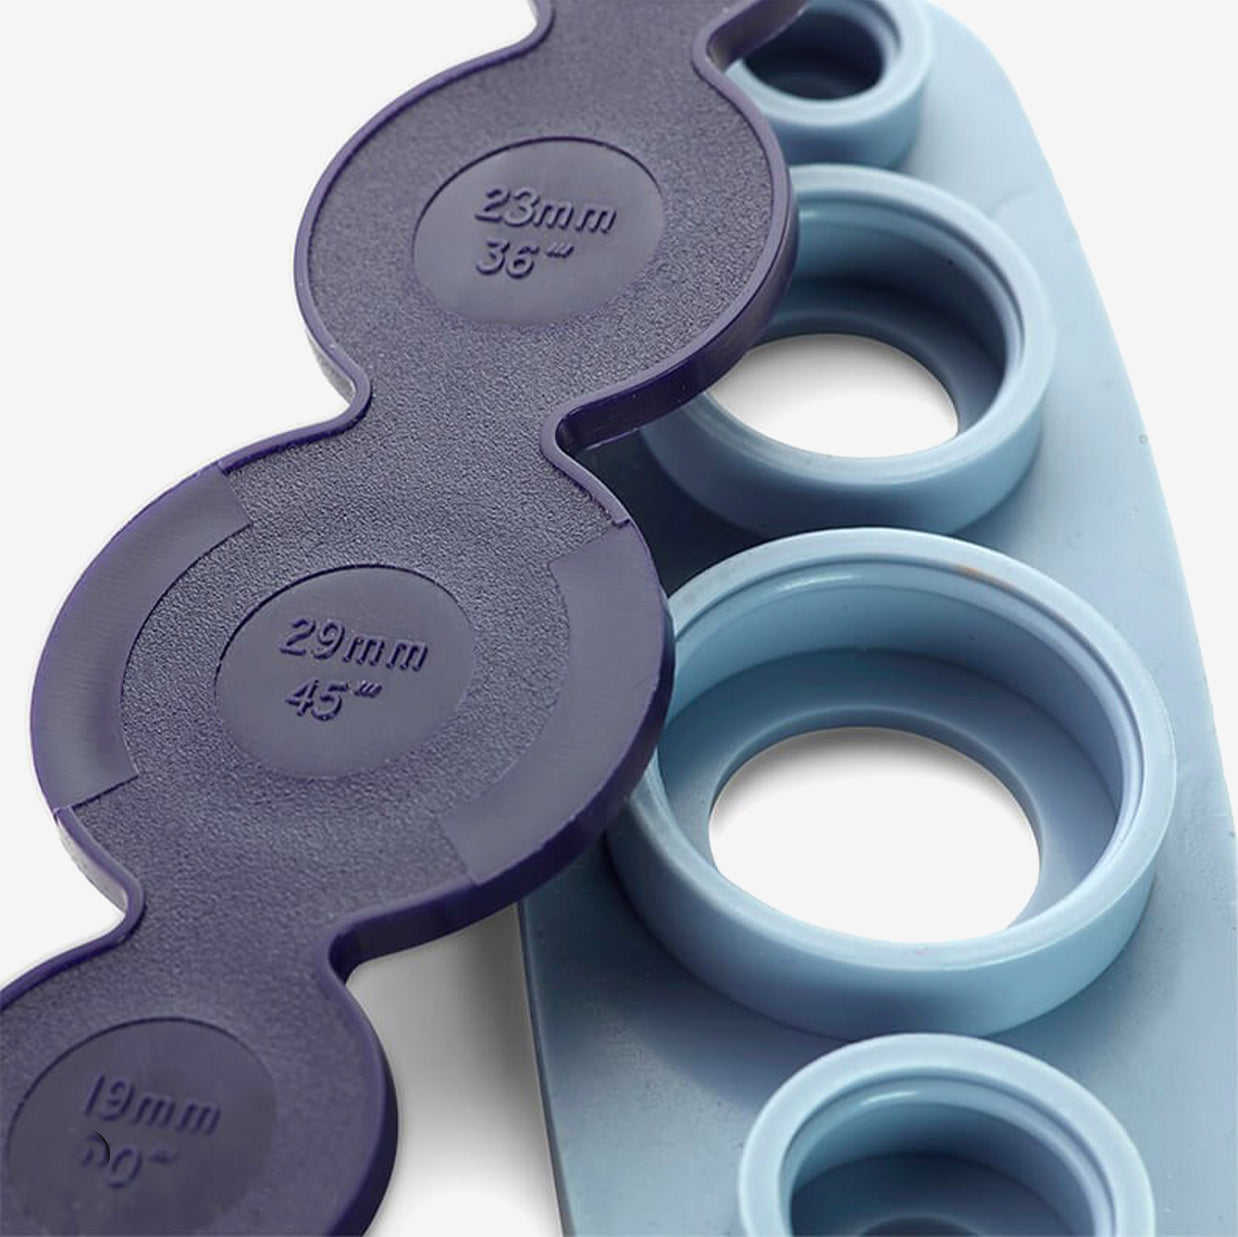 Prym 673170 Button Lining Tool: Add a Personalized Touch to Your Garments and Projects